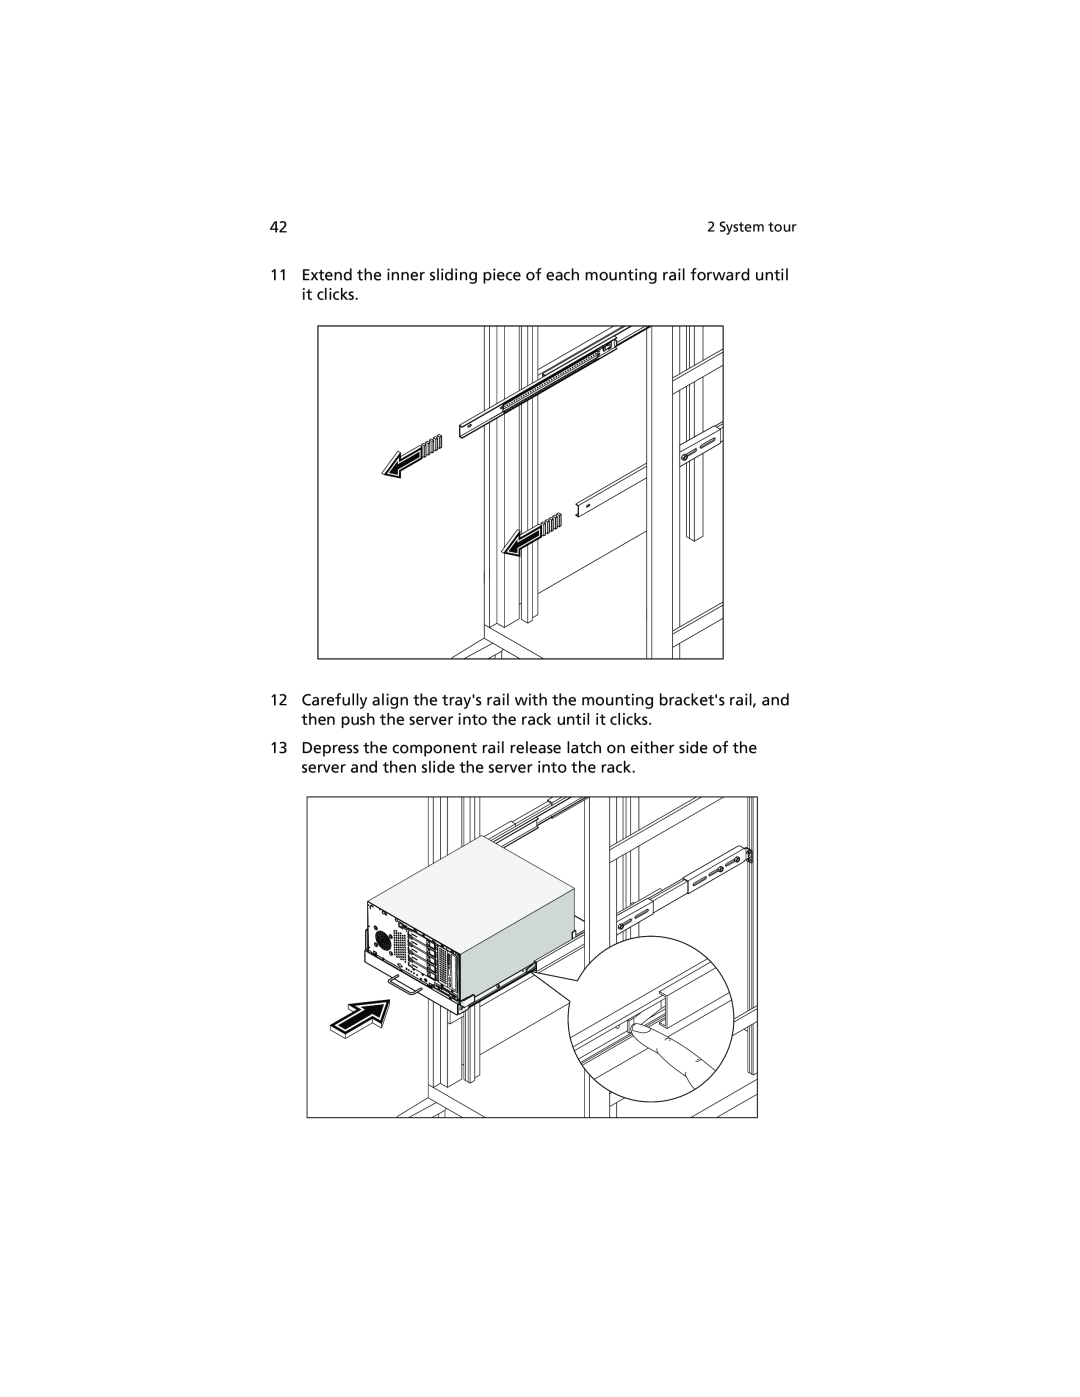 Acer Altos G610 manual Extend the inner sliding piece of each mounting rail forward until it clicks 